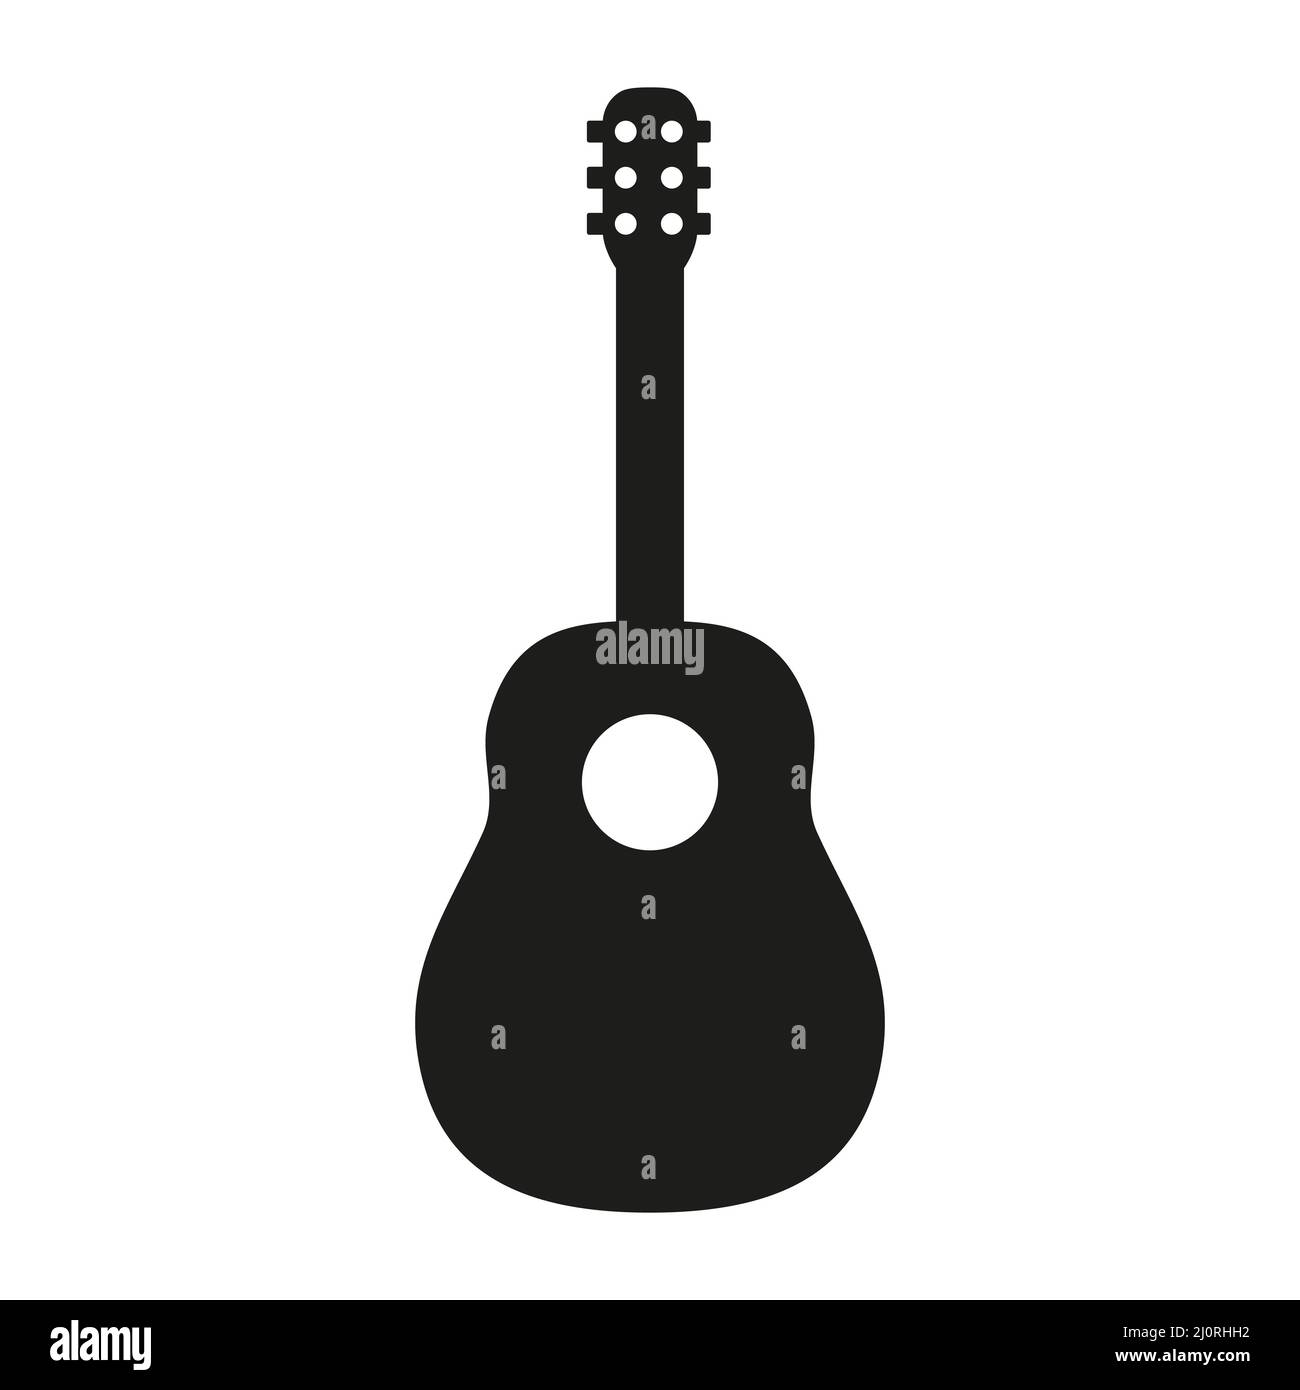 Guitar icon. Black silhouette. Musical instrument. Stock Vector